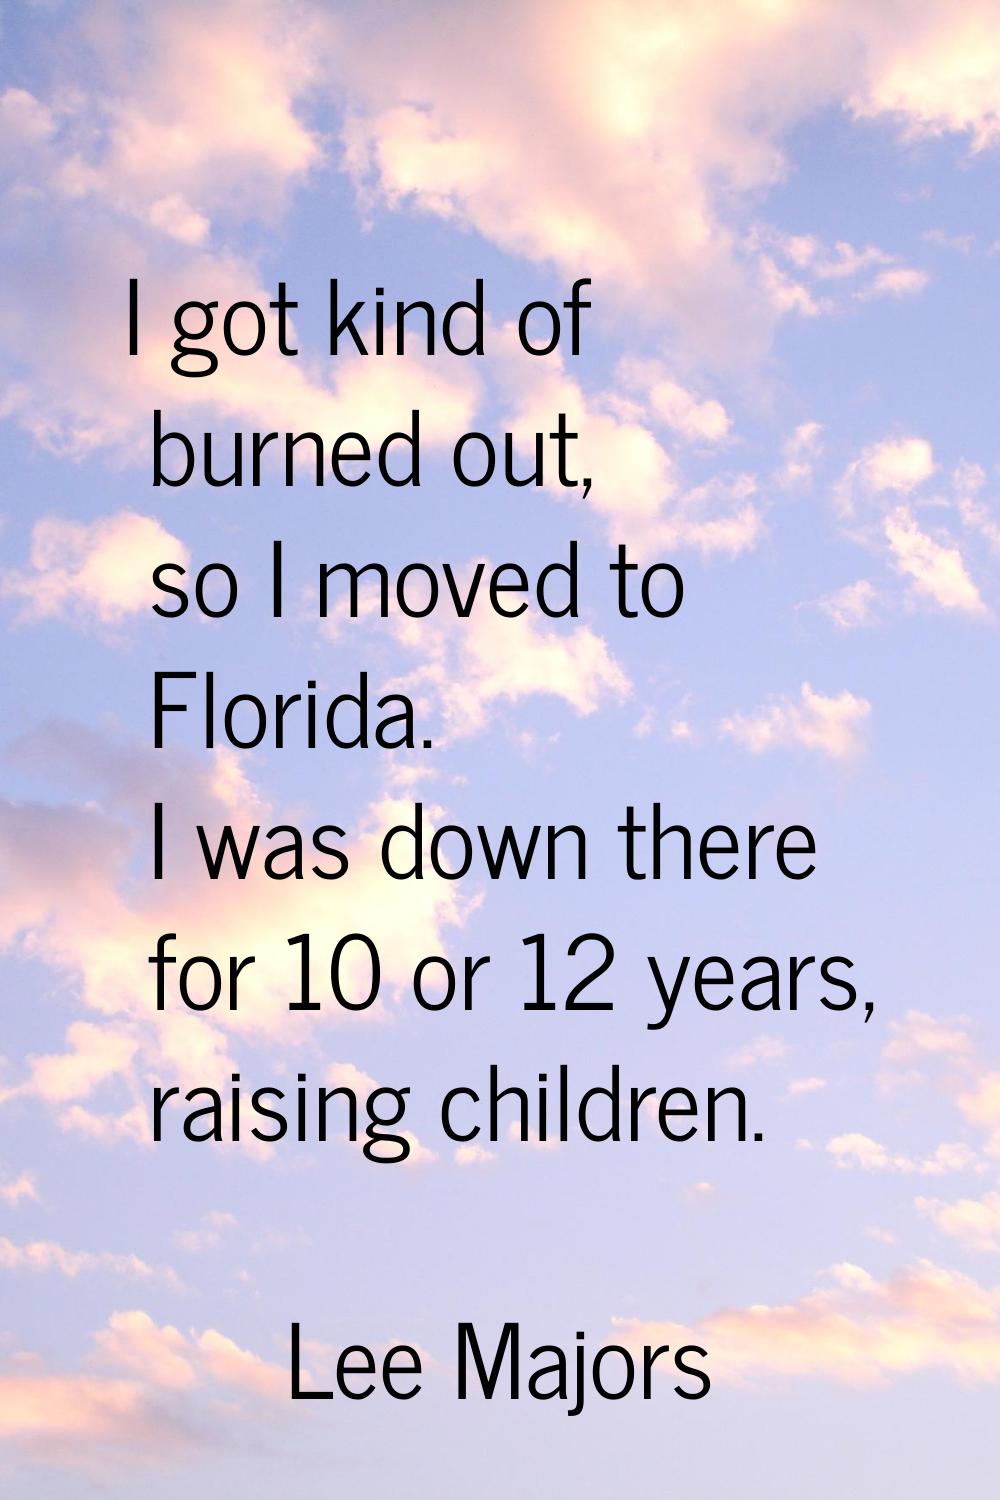 I got kind of burned out, so I moved to Florida. I was down there for 10 or 12 years, raising child